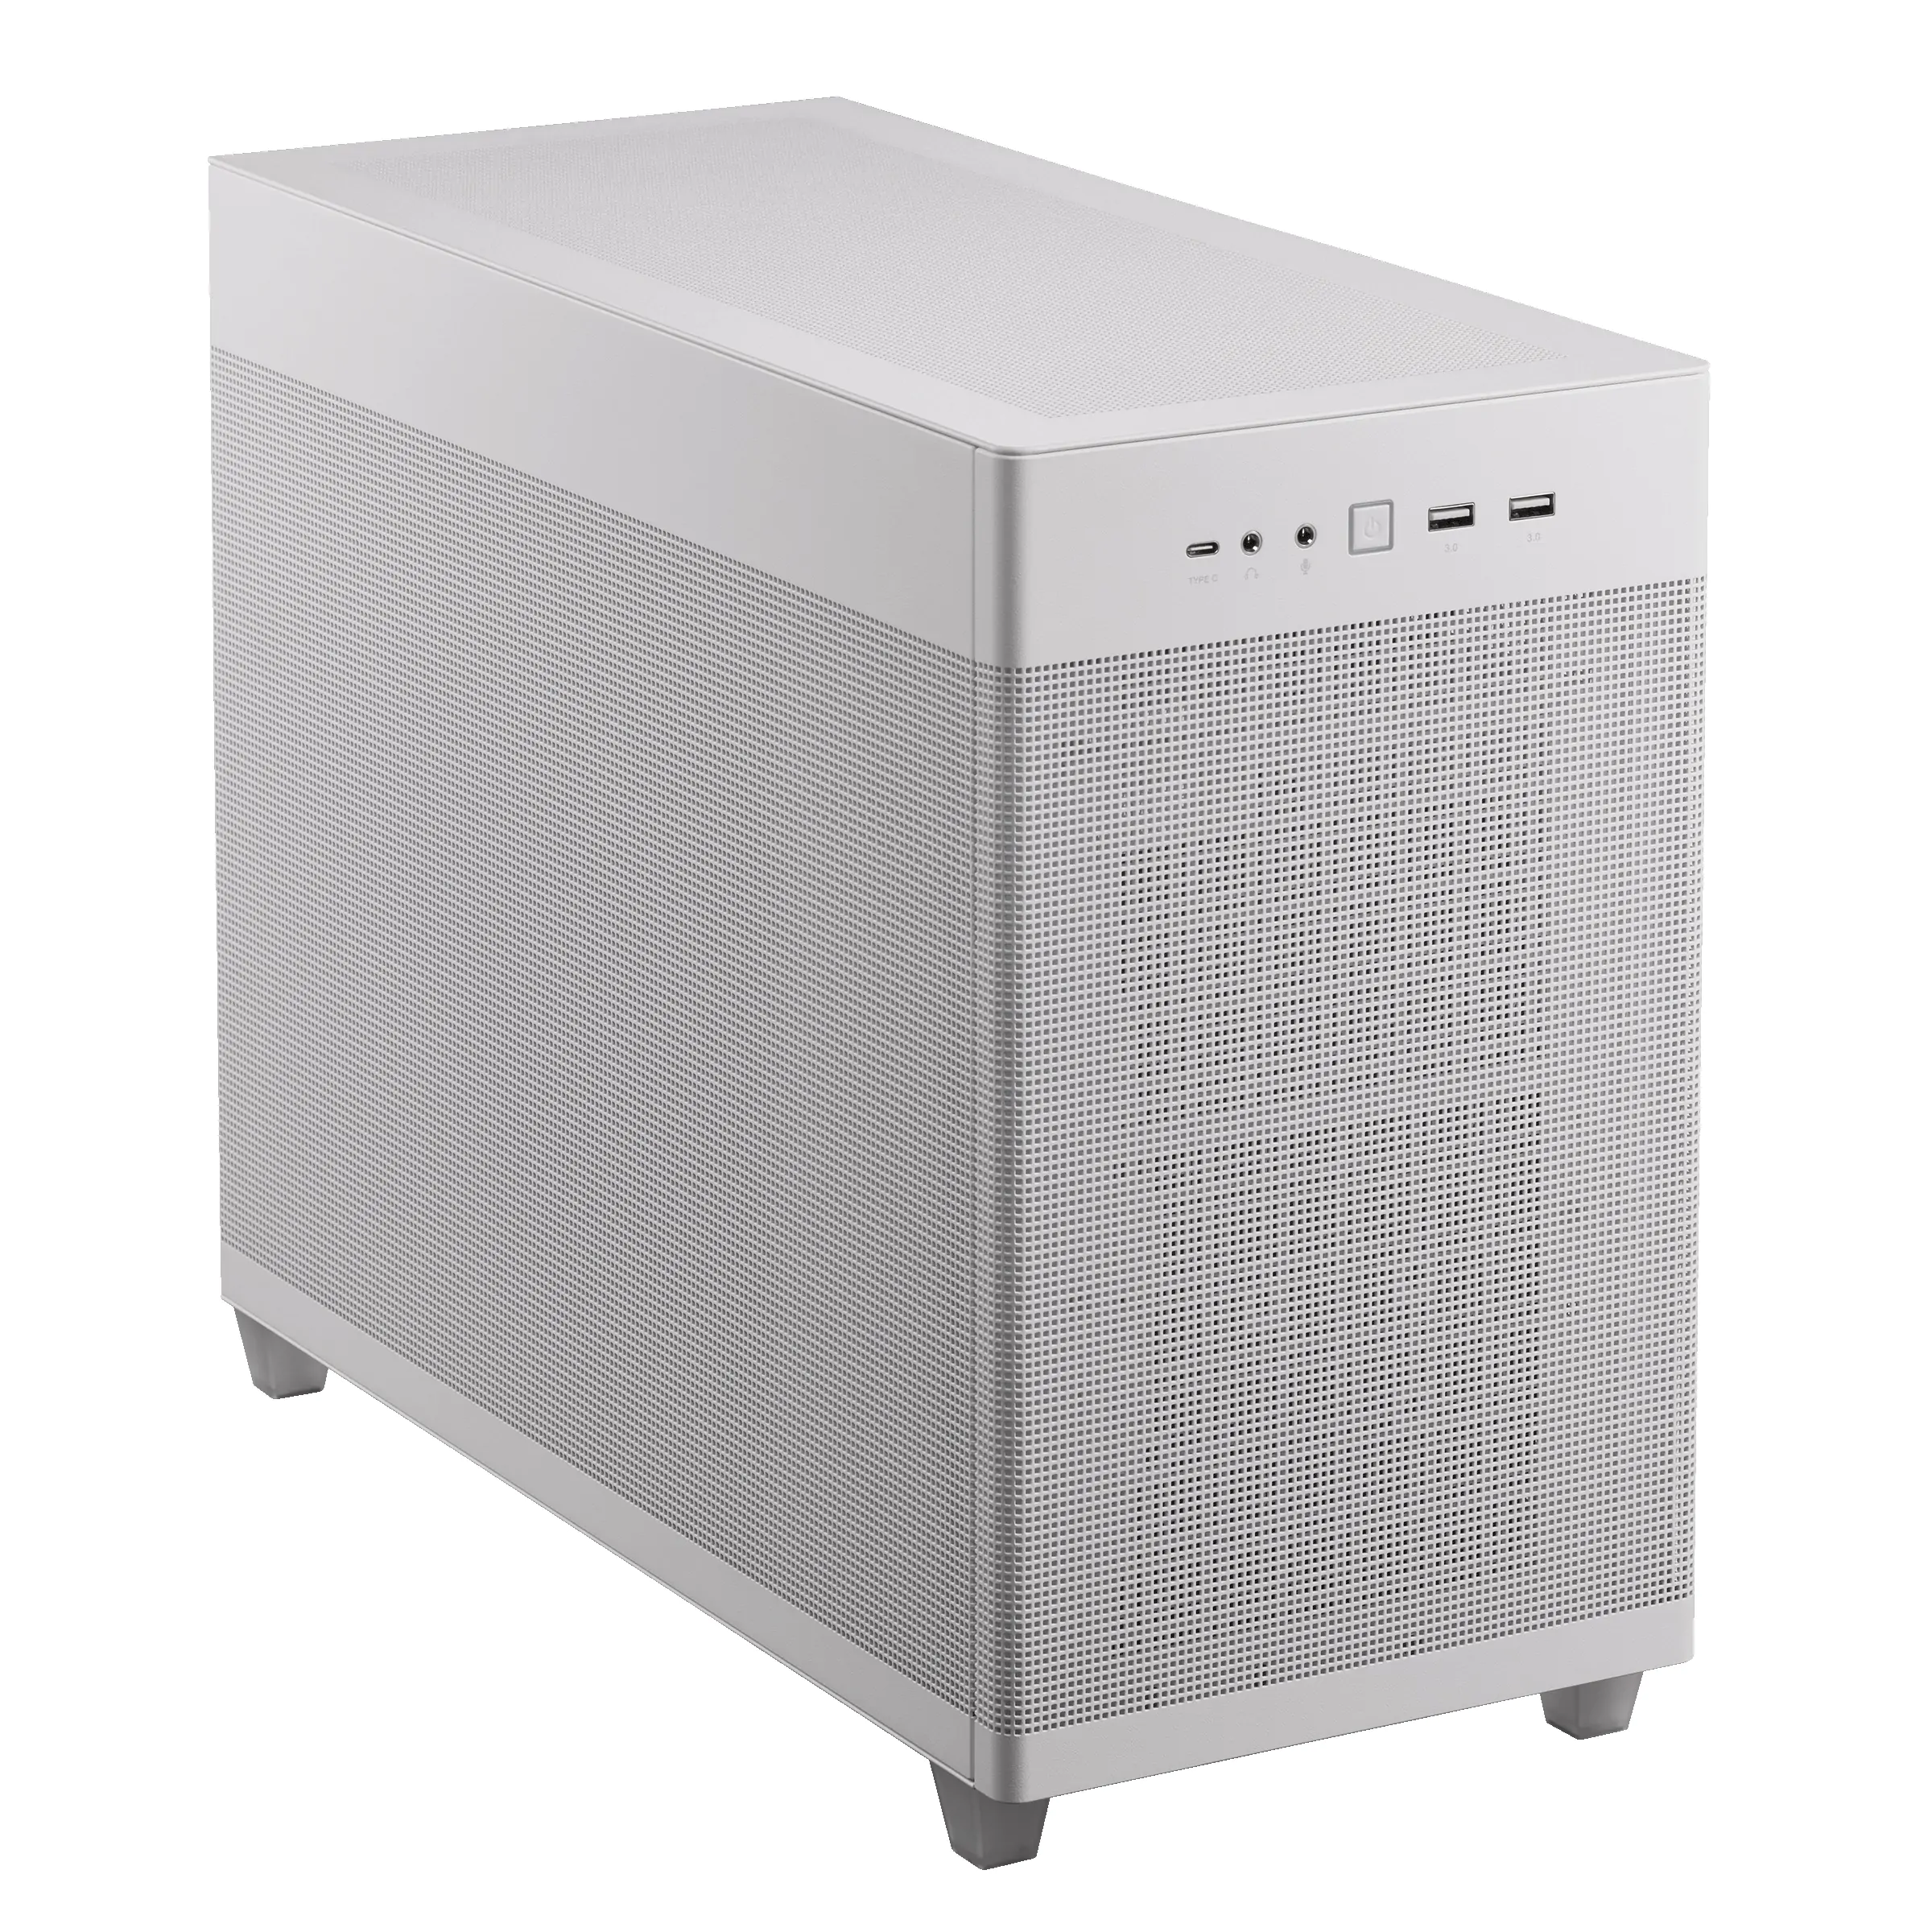 ASUS: presents the Prime AP201 MicroATX chassis